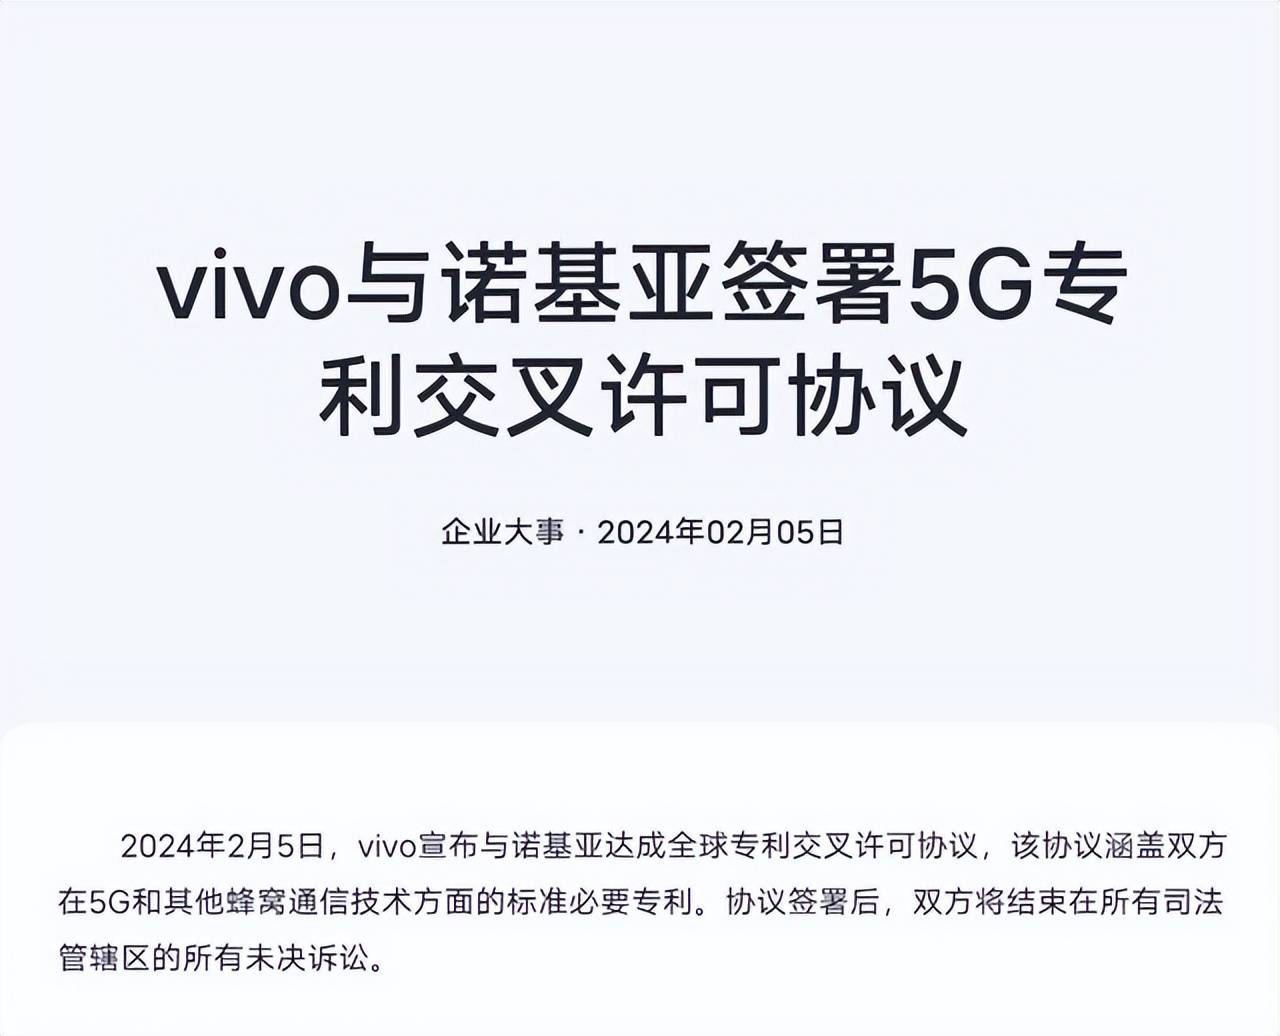 Vivo and Nokia Sign Global Patent Deal